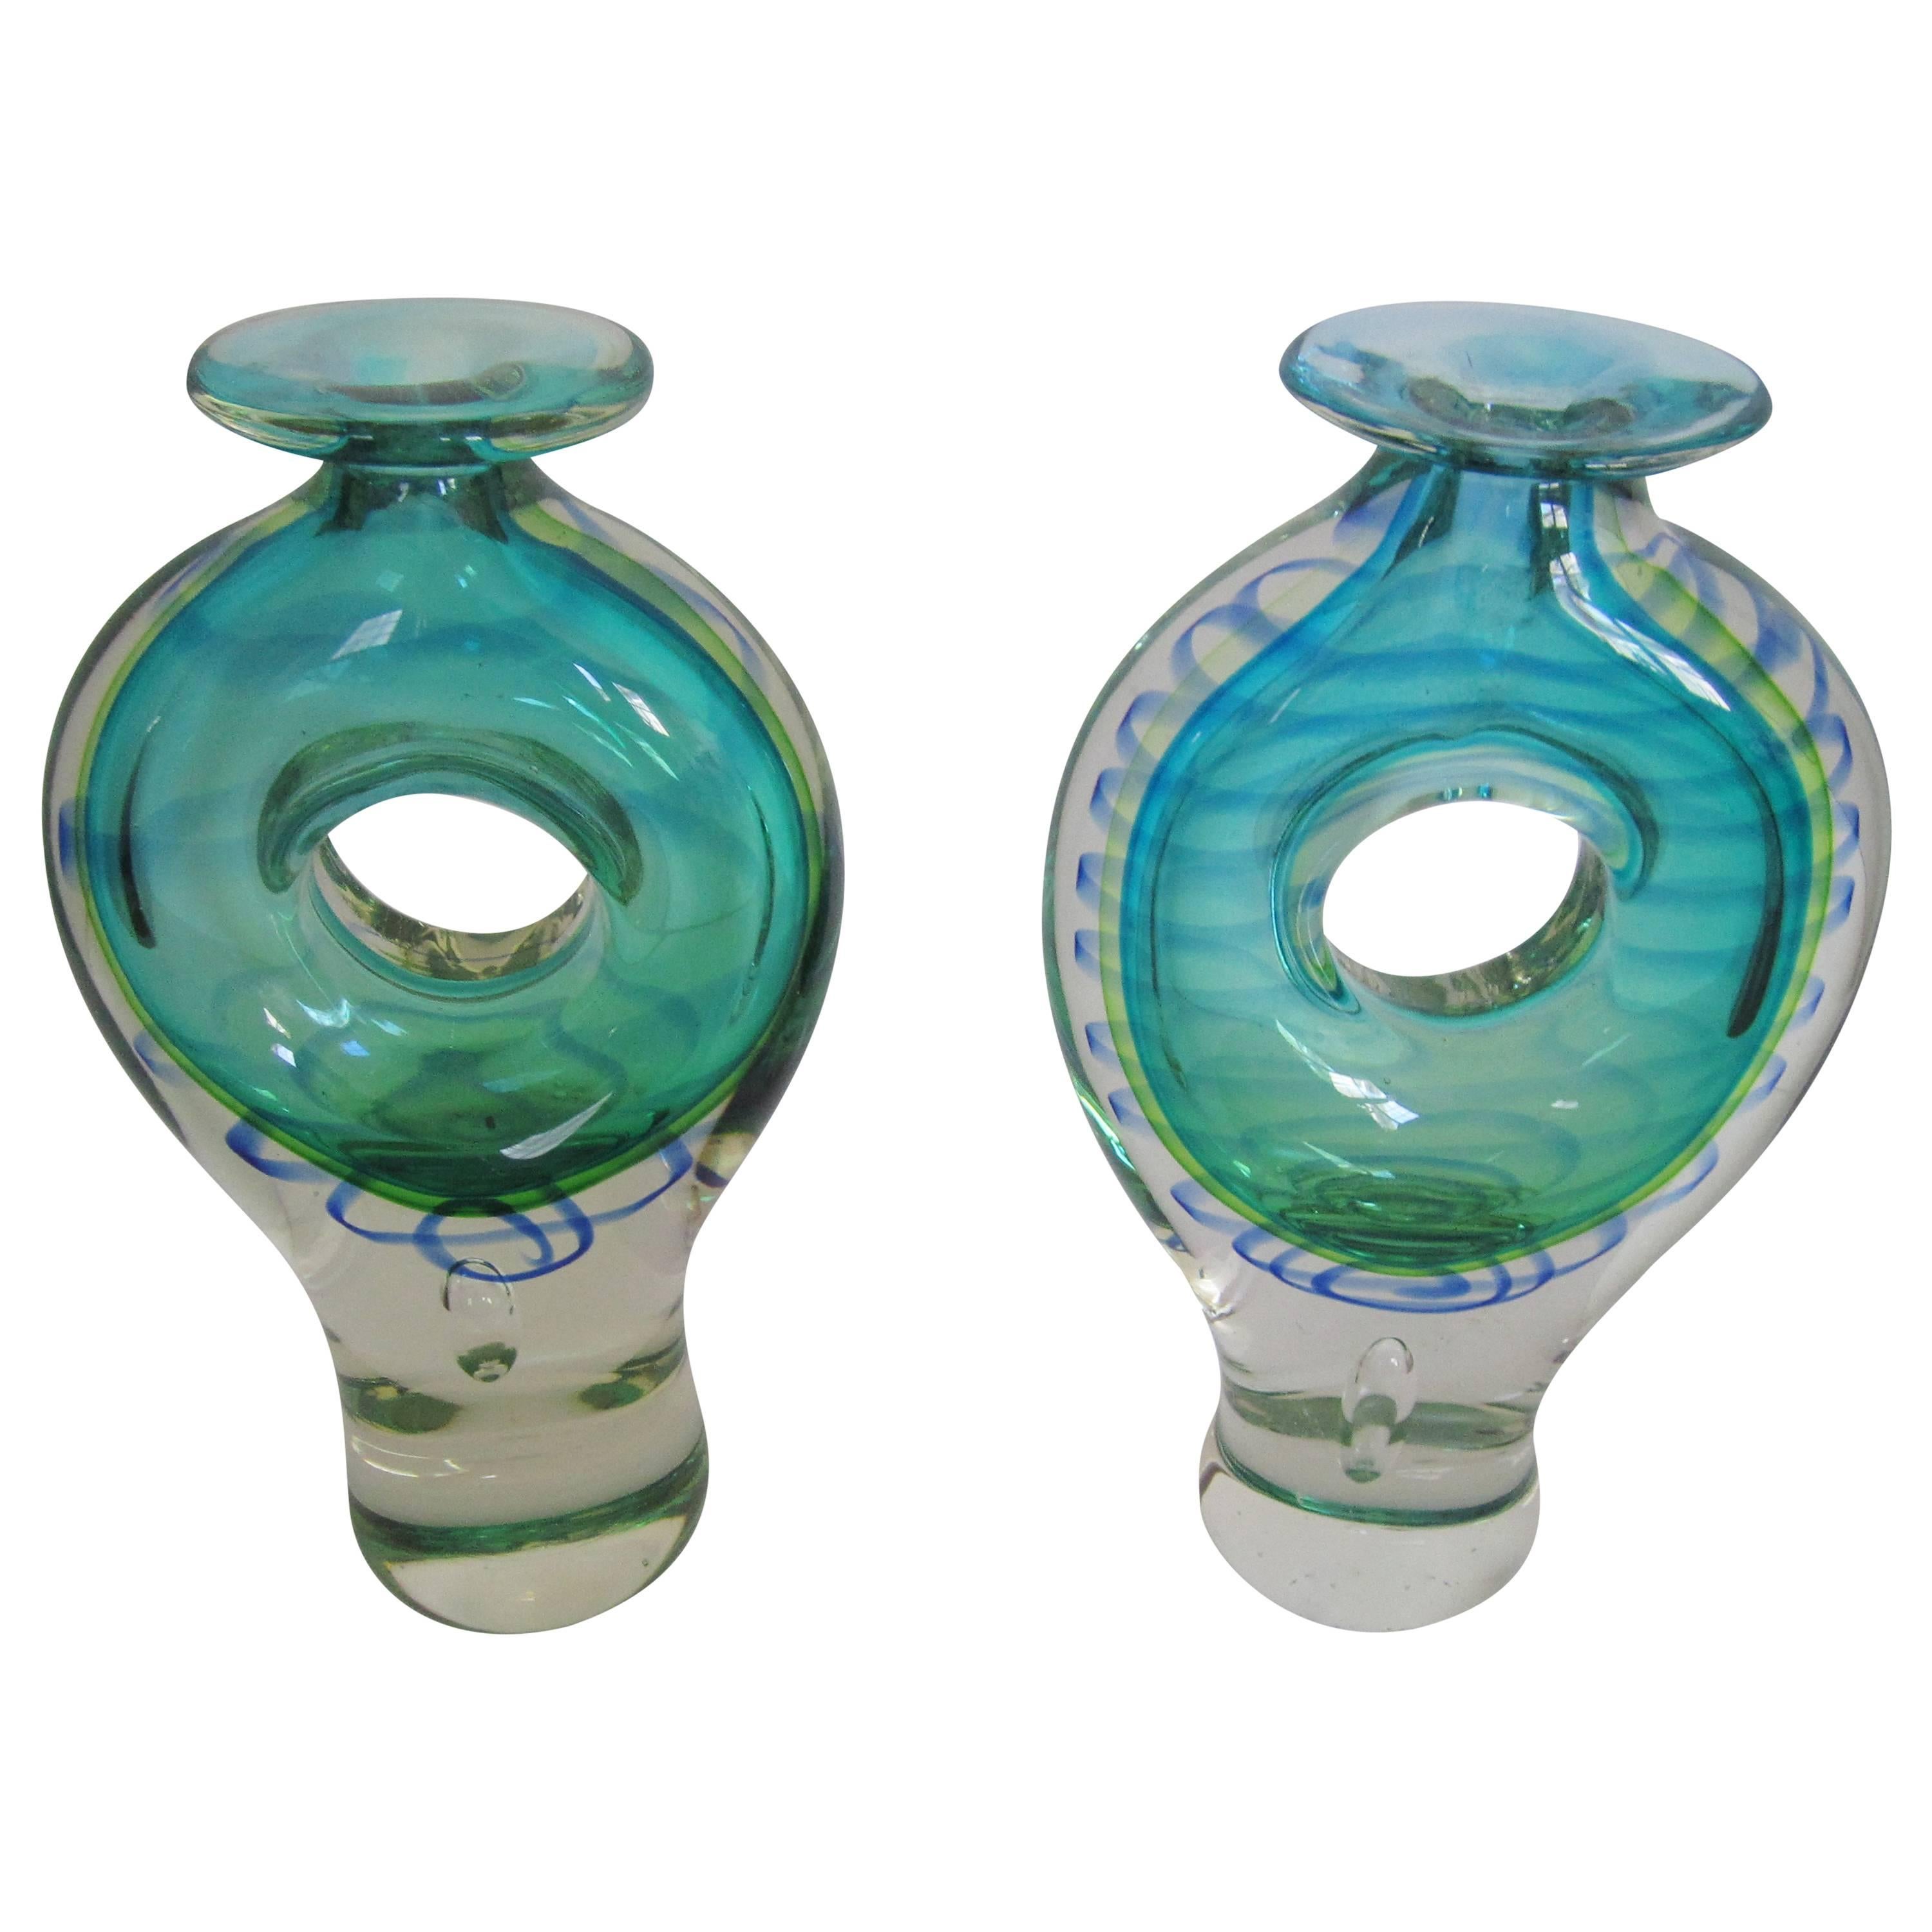 Pair of Modern Blue and Green Art Glass Vessels or Vases